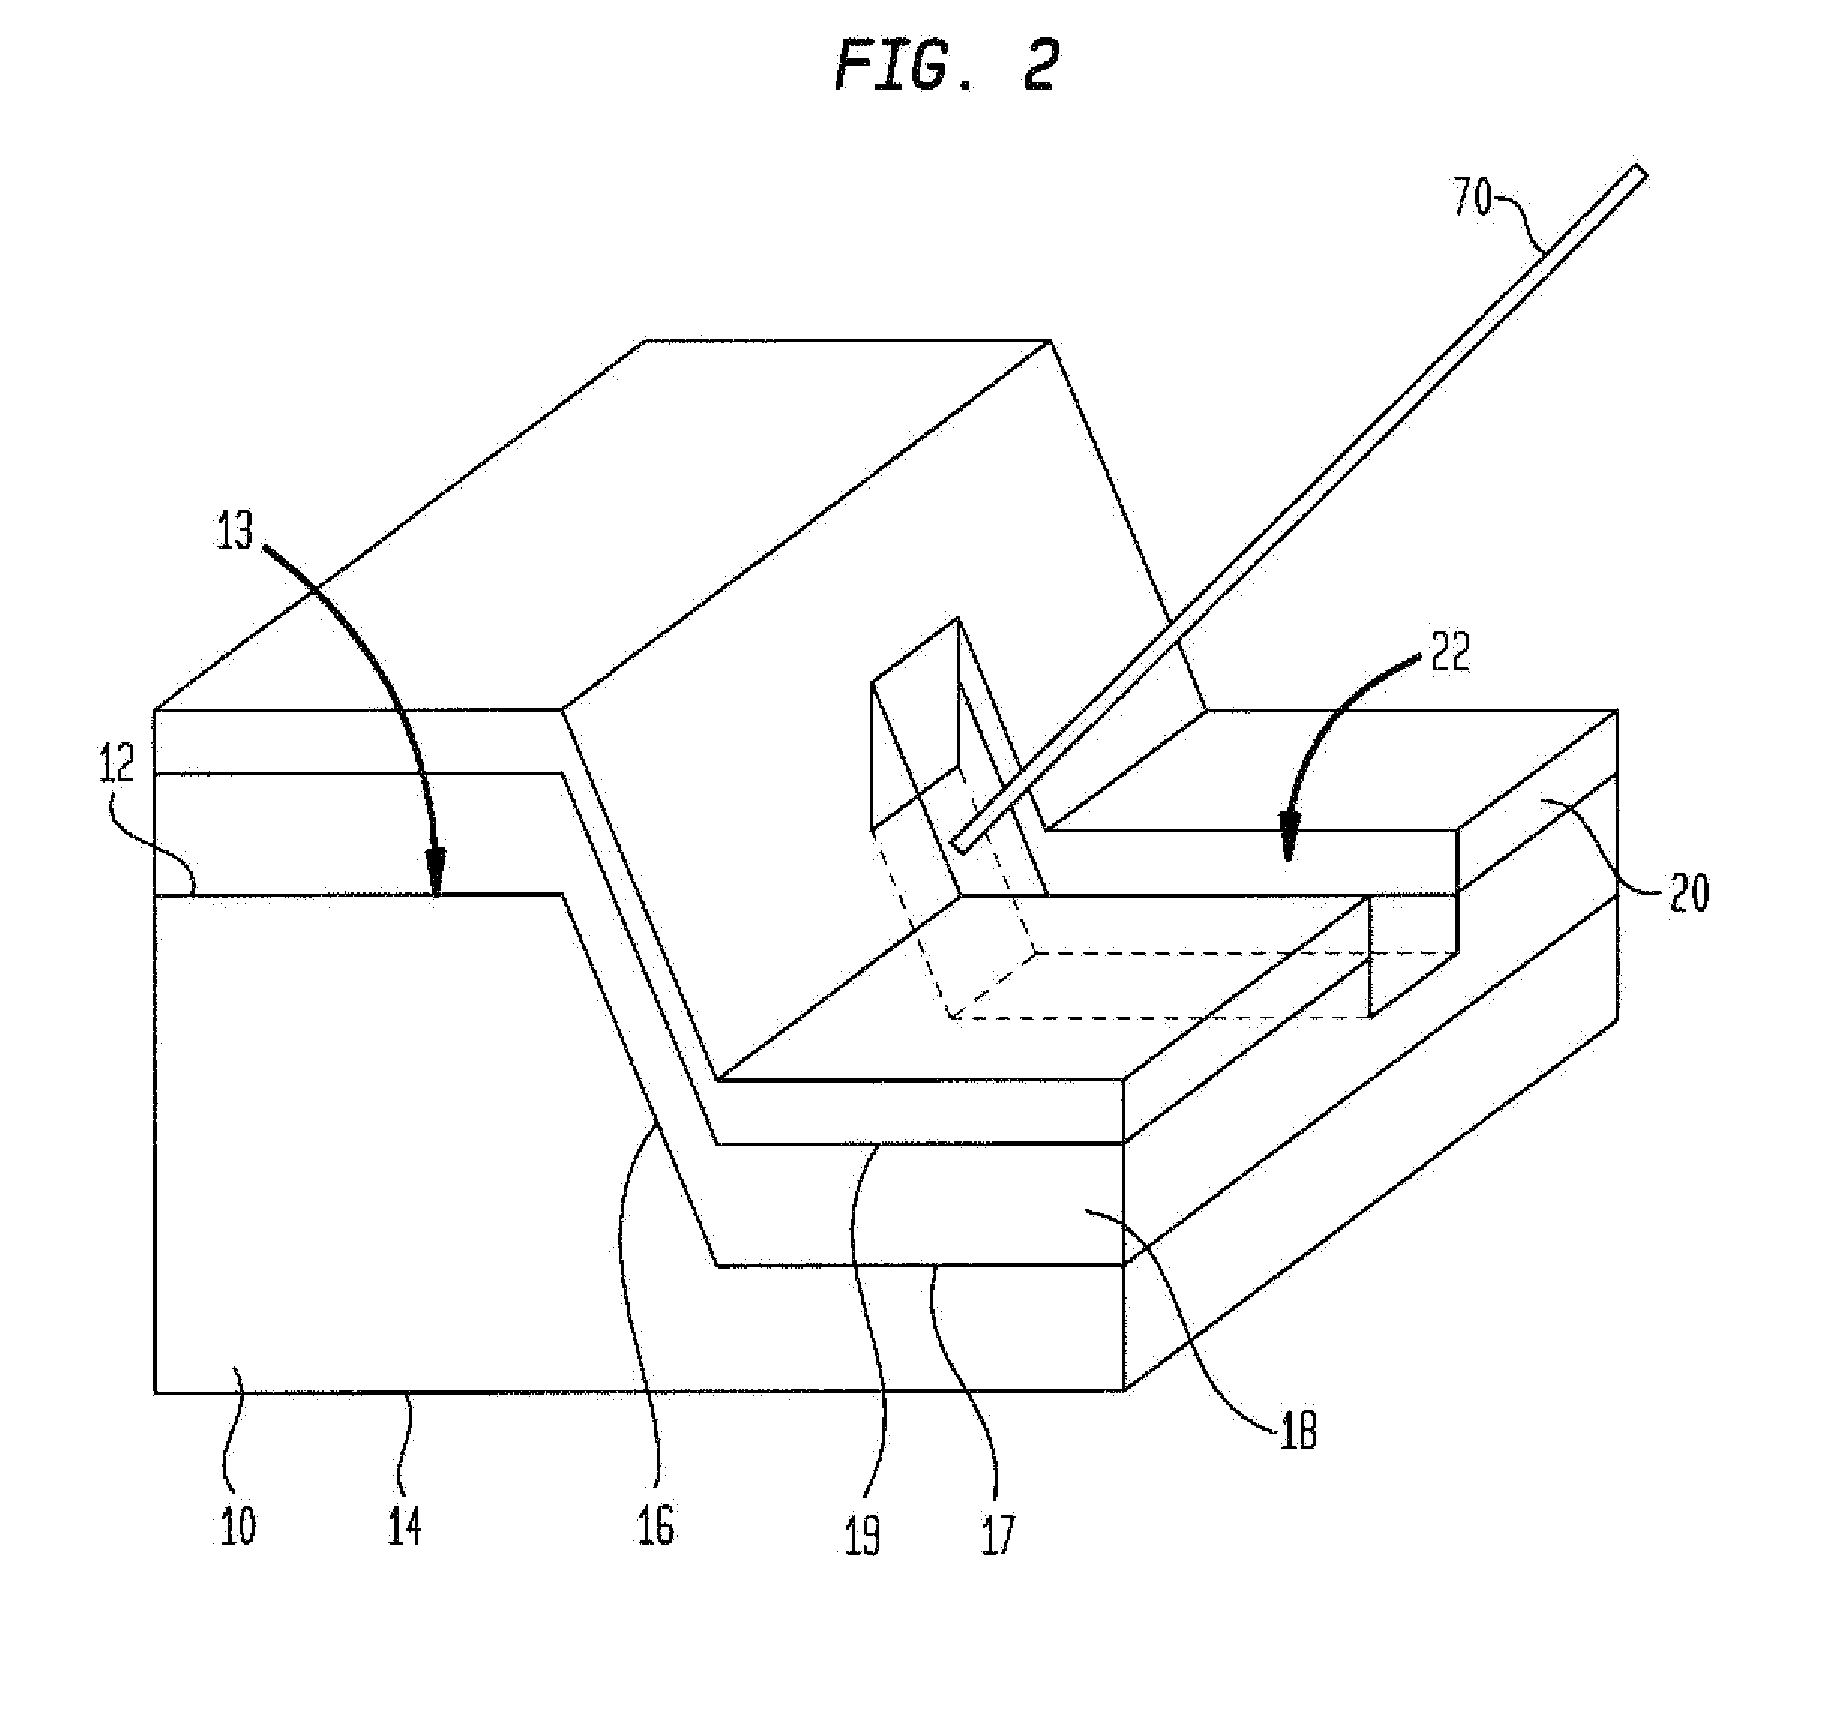 Non-lithographic formation of three-dimensional conductive elements